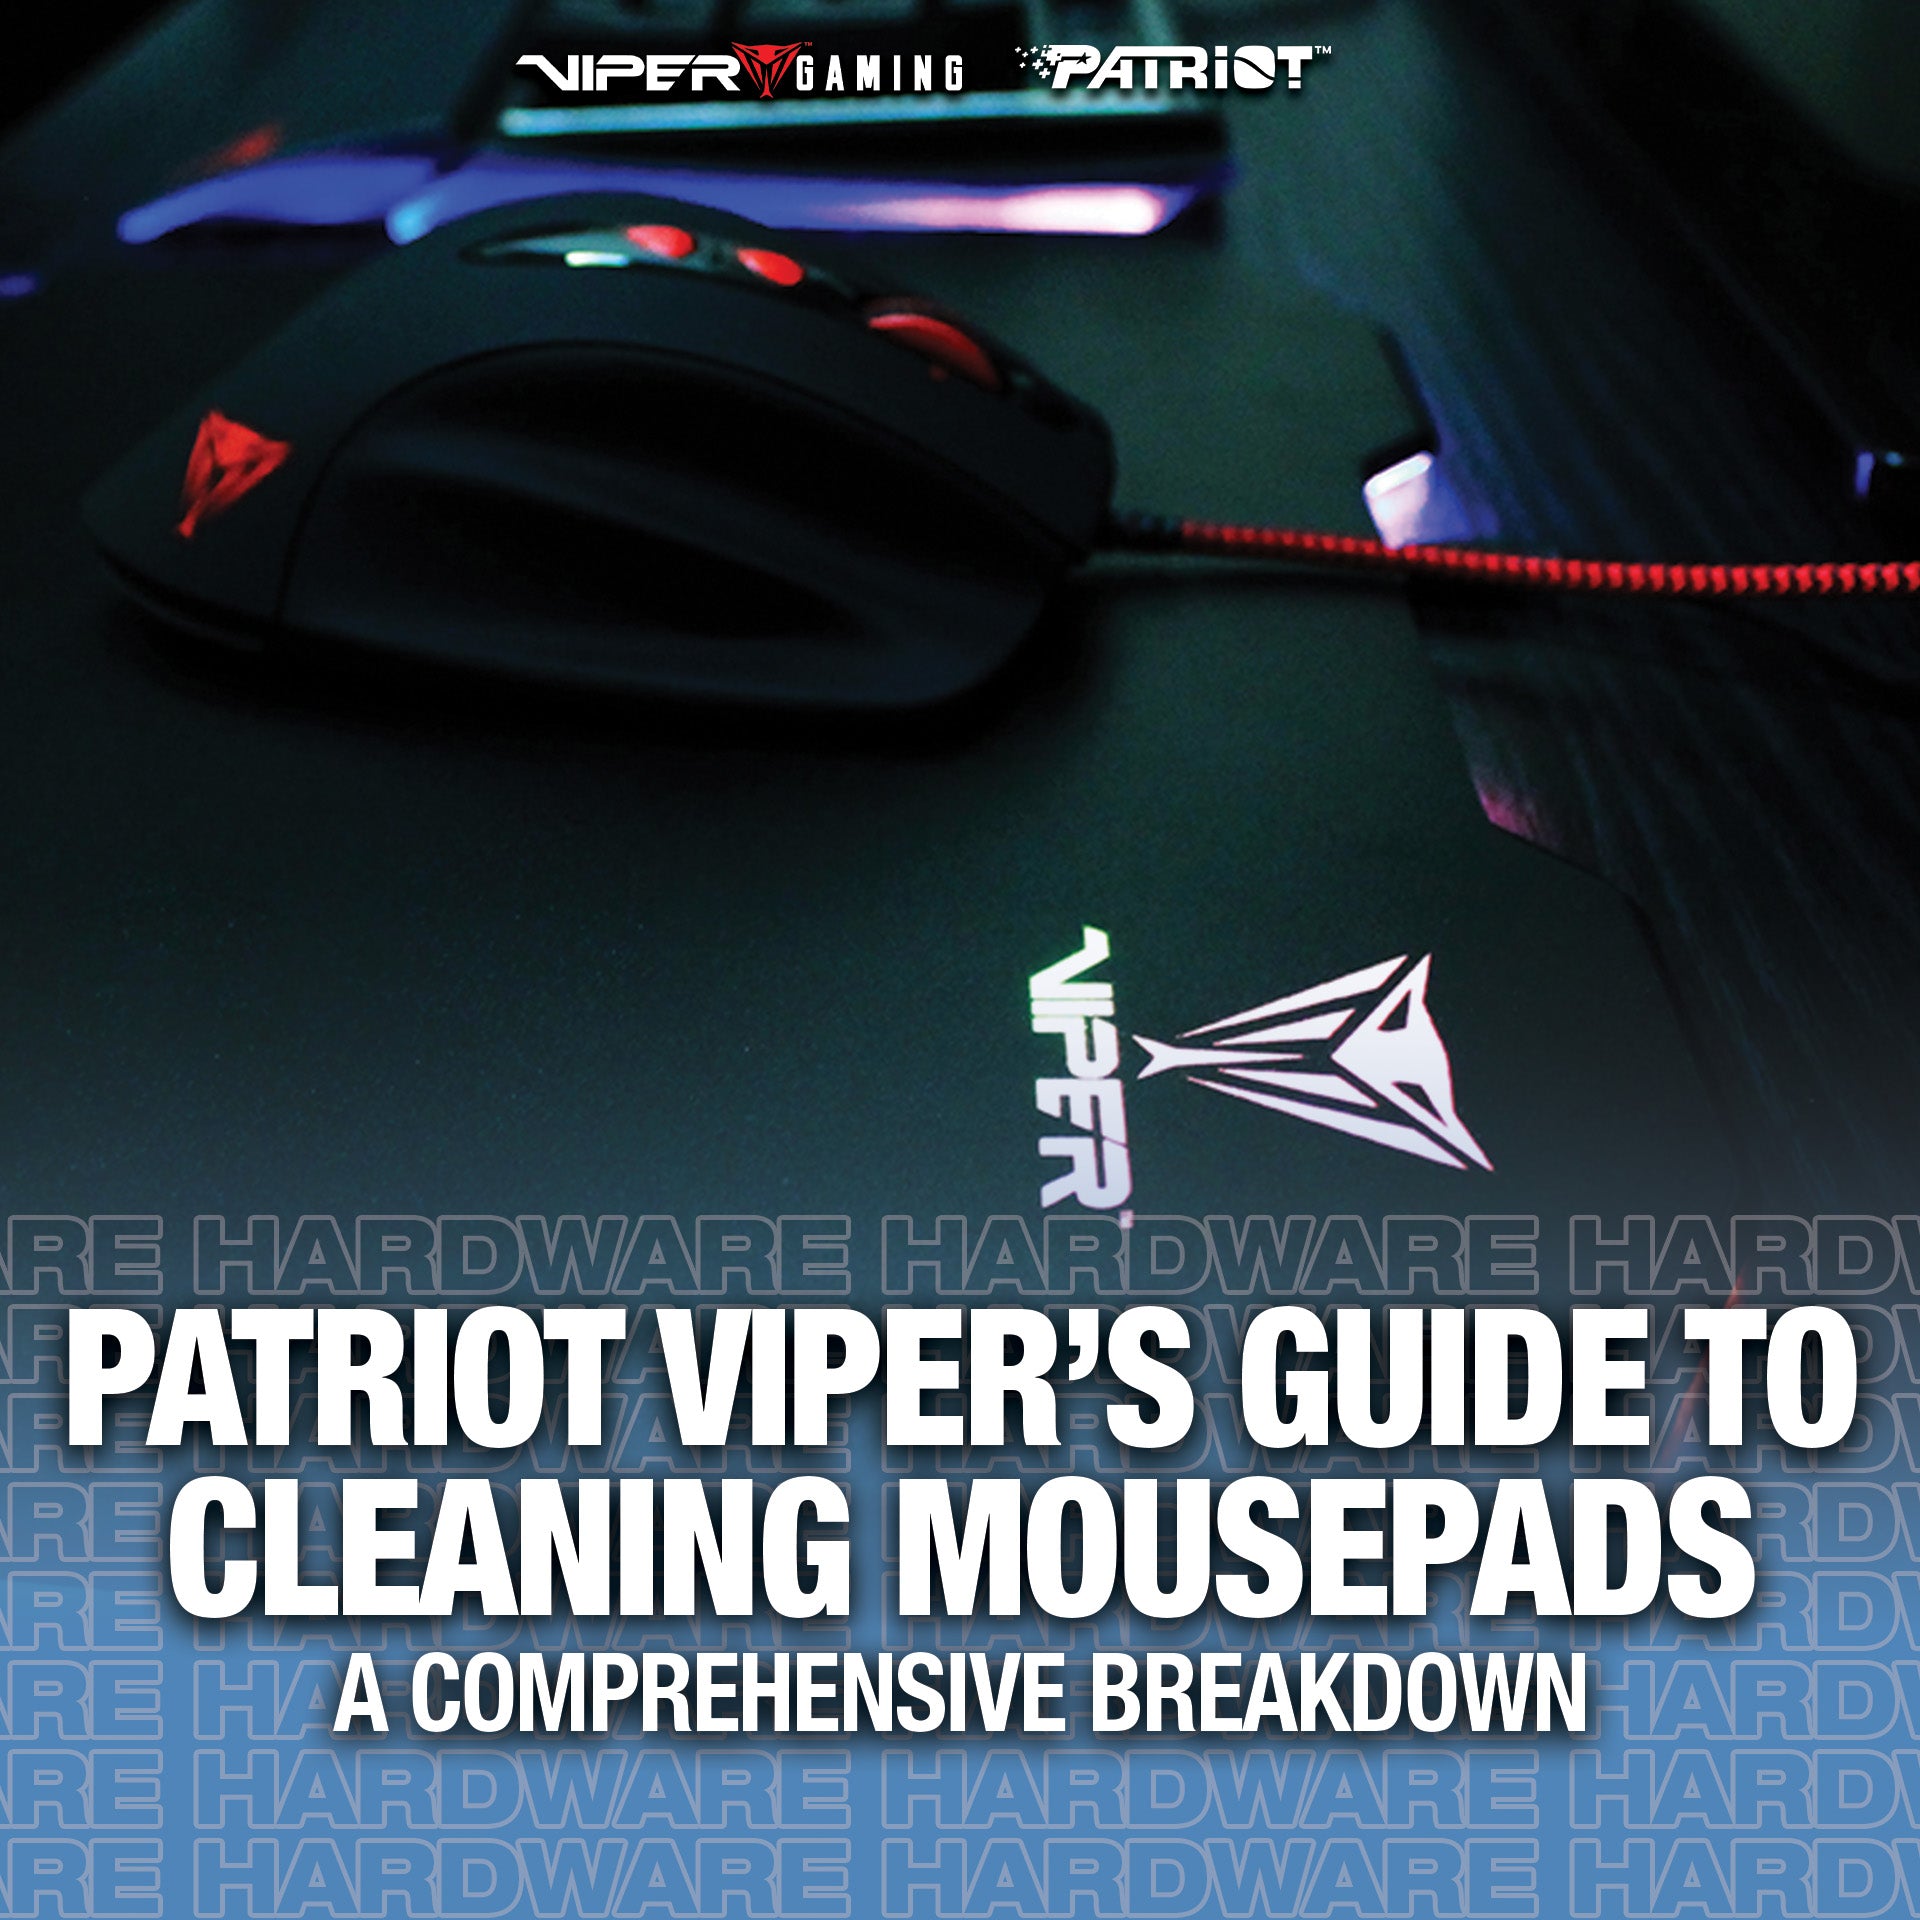 Patriot Viper's Guide to Cleaning Mousepads